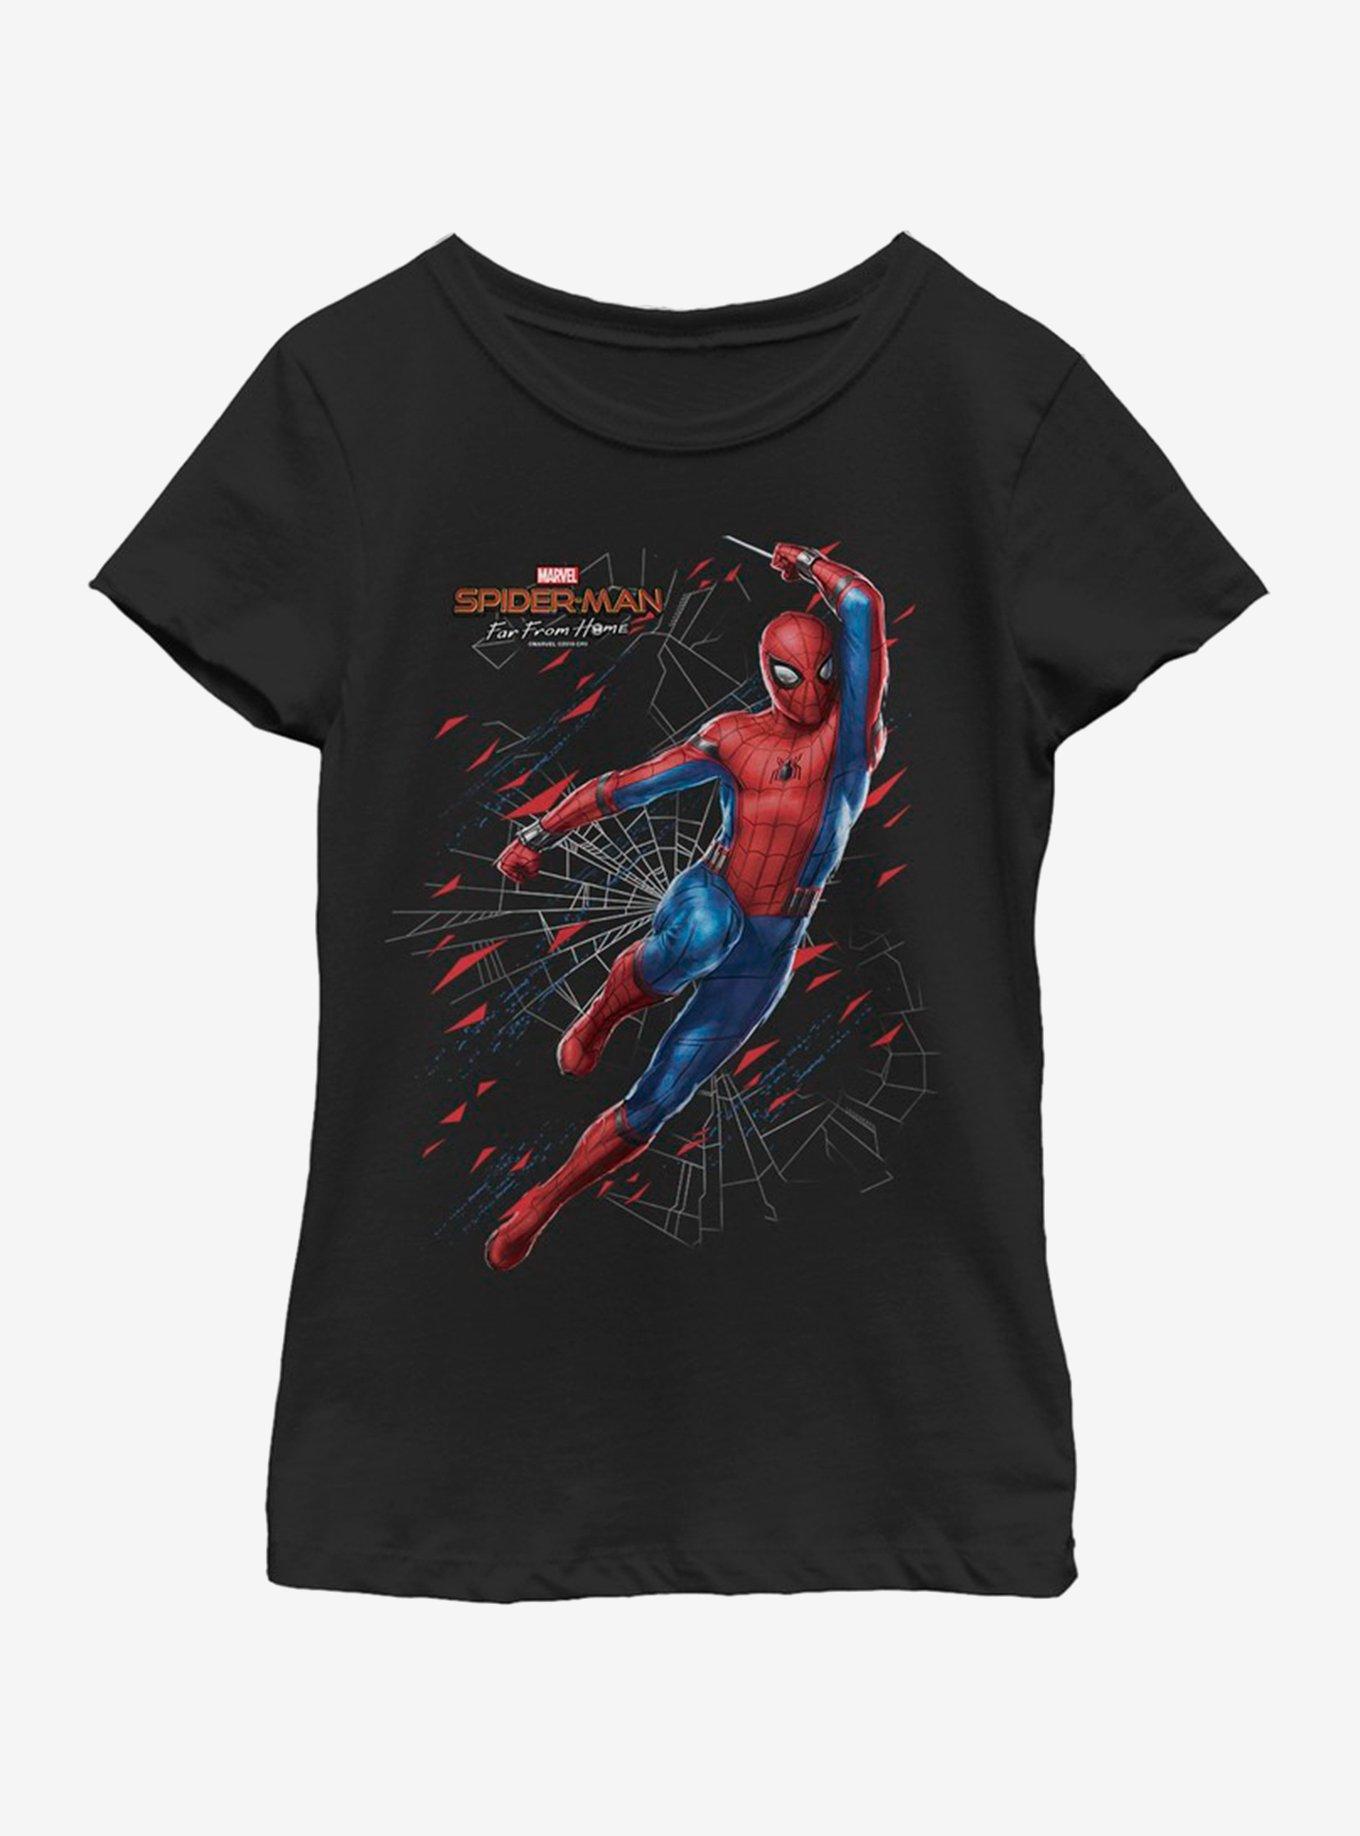 Marvel Spiderman: Far From Home Traveling Spidy Youth Girls T-Shirt, BLACK, hi-res